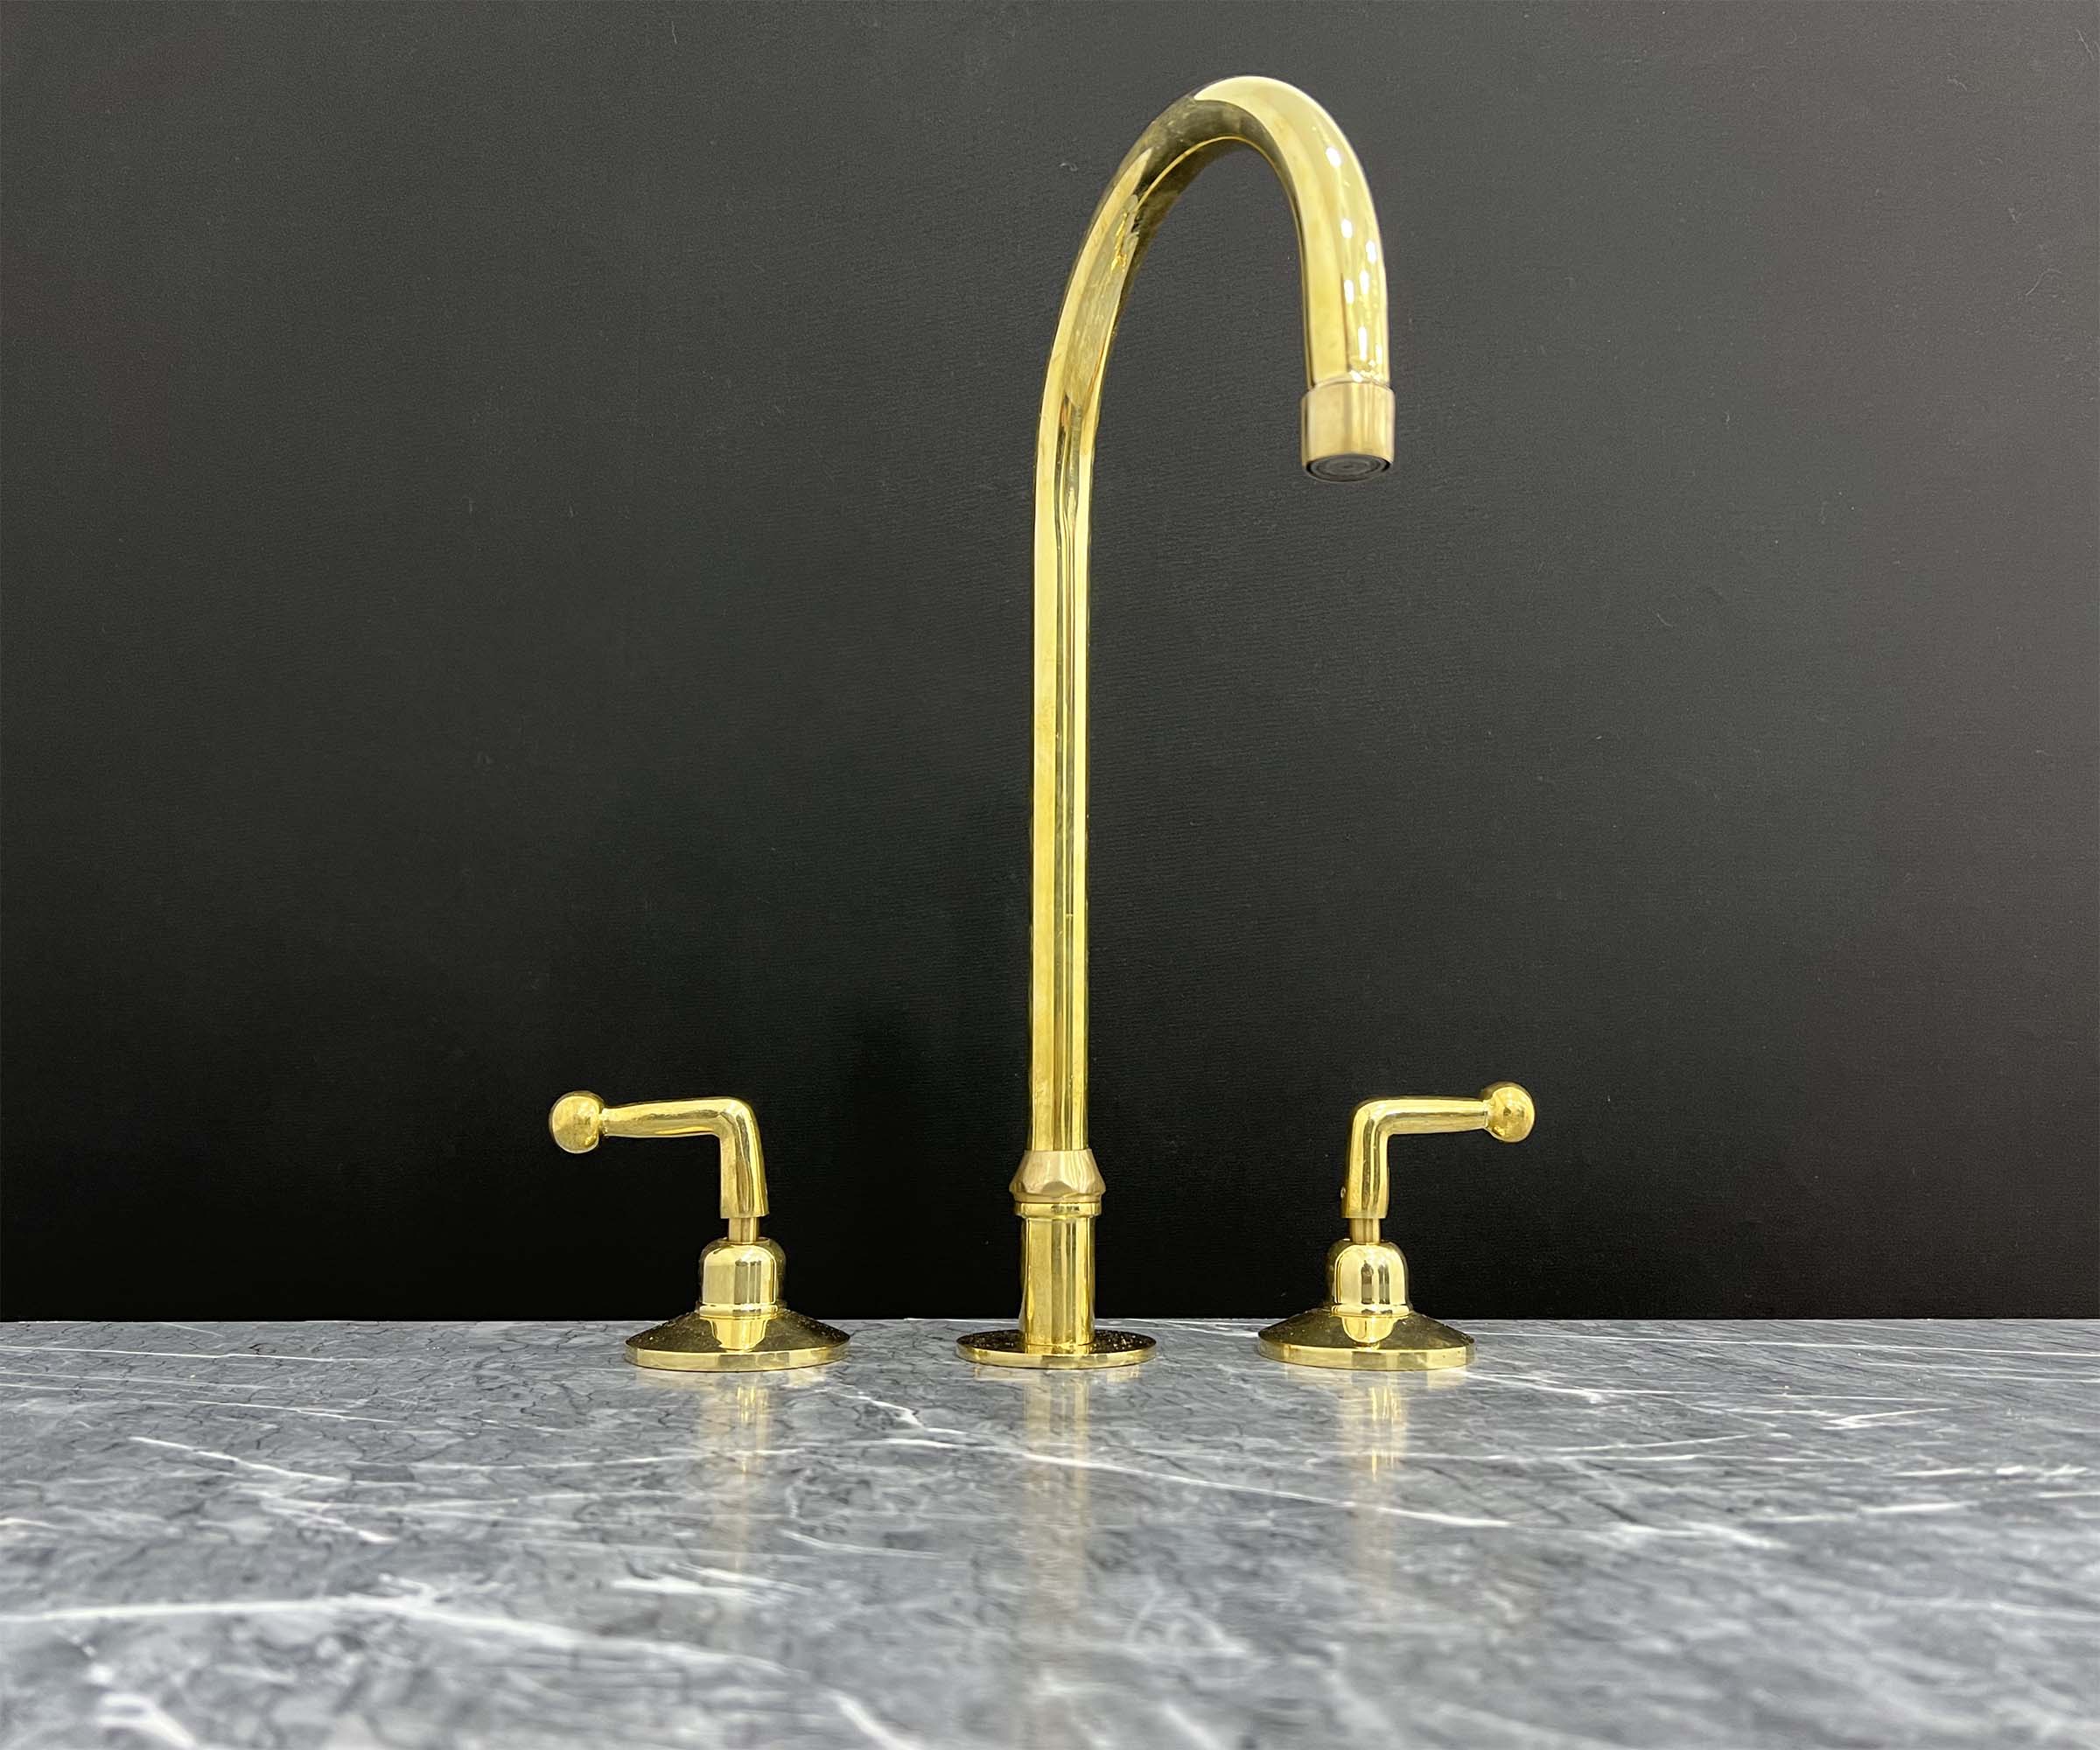 Solid Unlacquered Brass Faucet Widespread